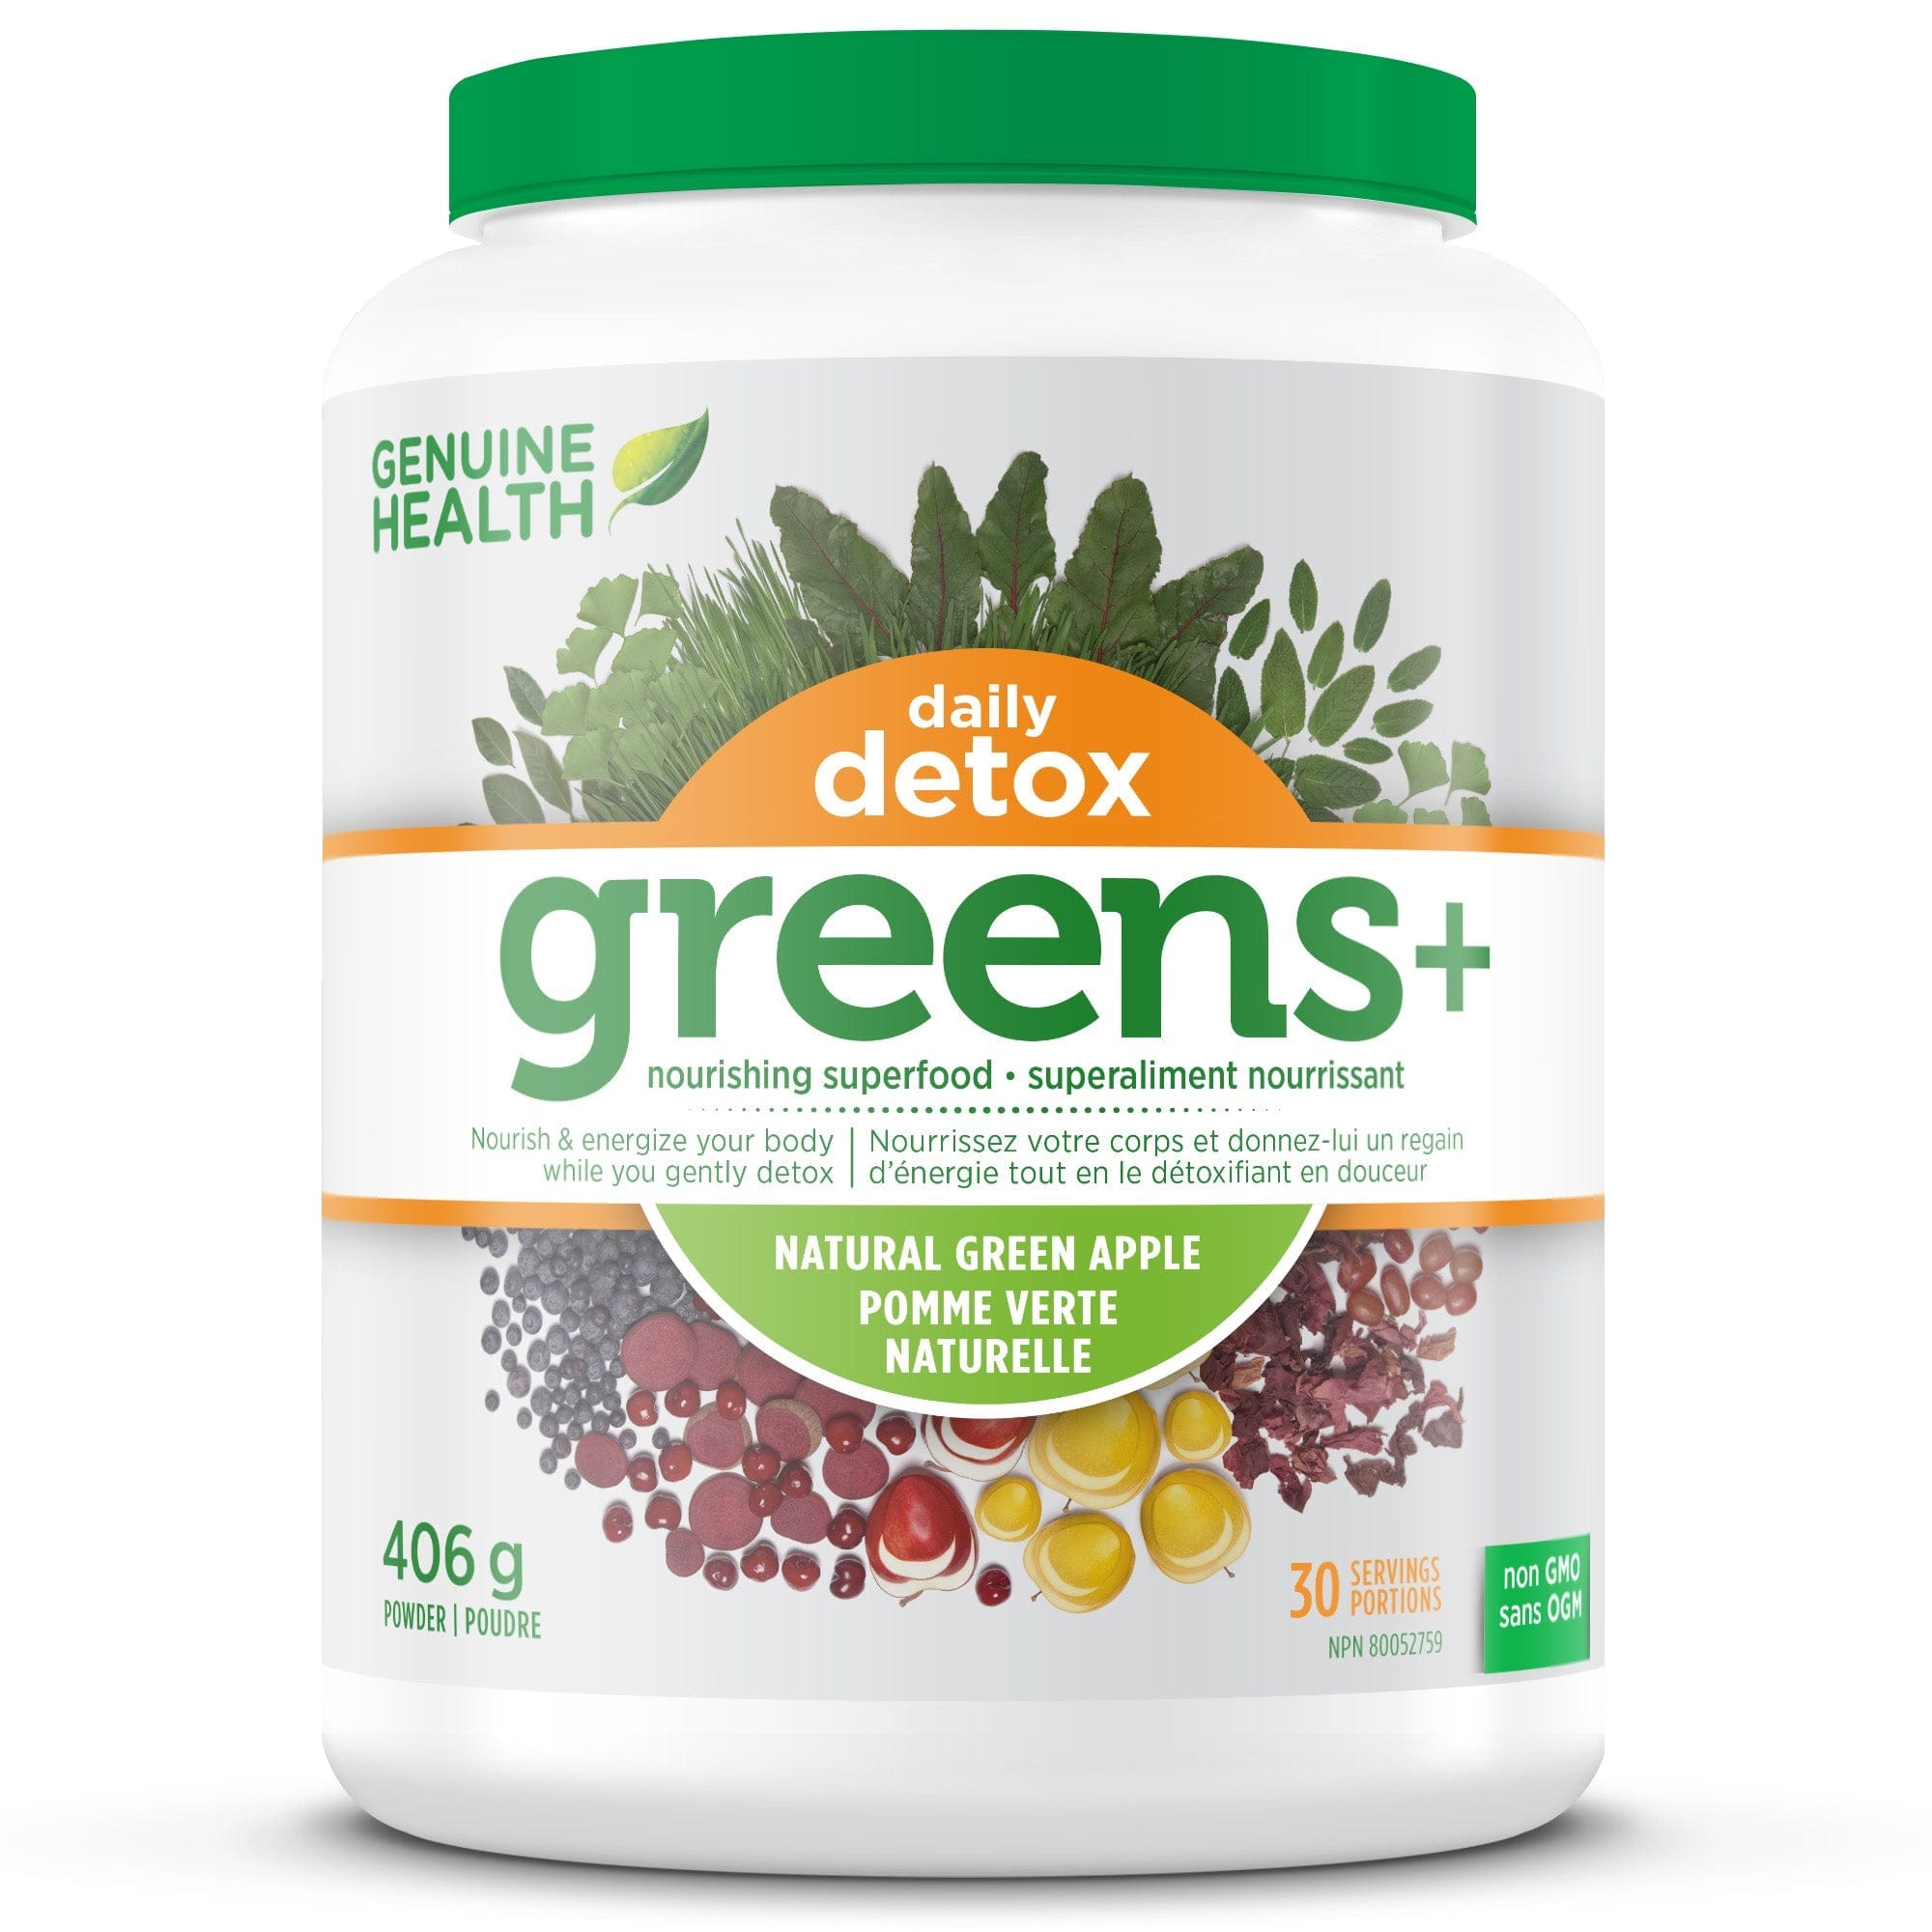 GENUINE HEALTH Suppléments Greens+ daily detox (pomme) 406g